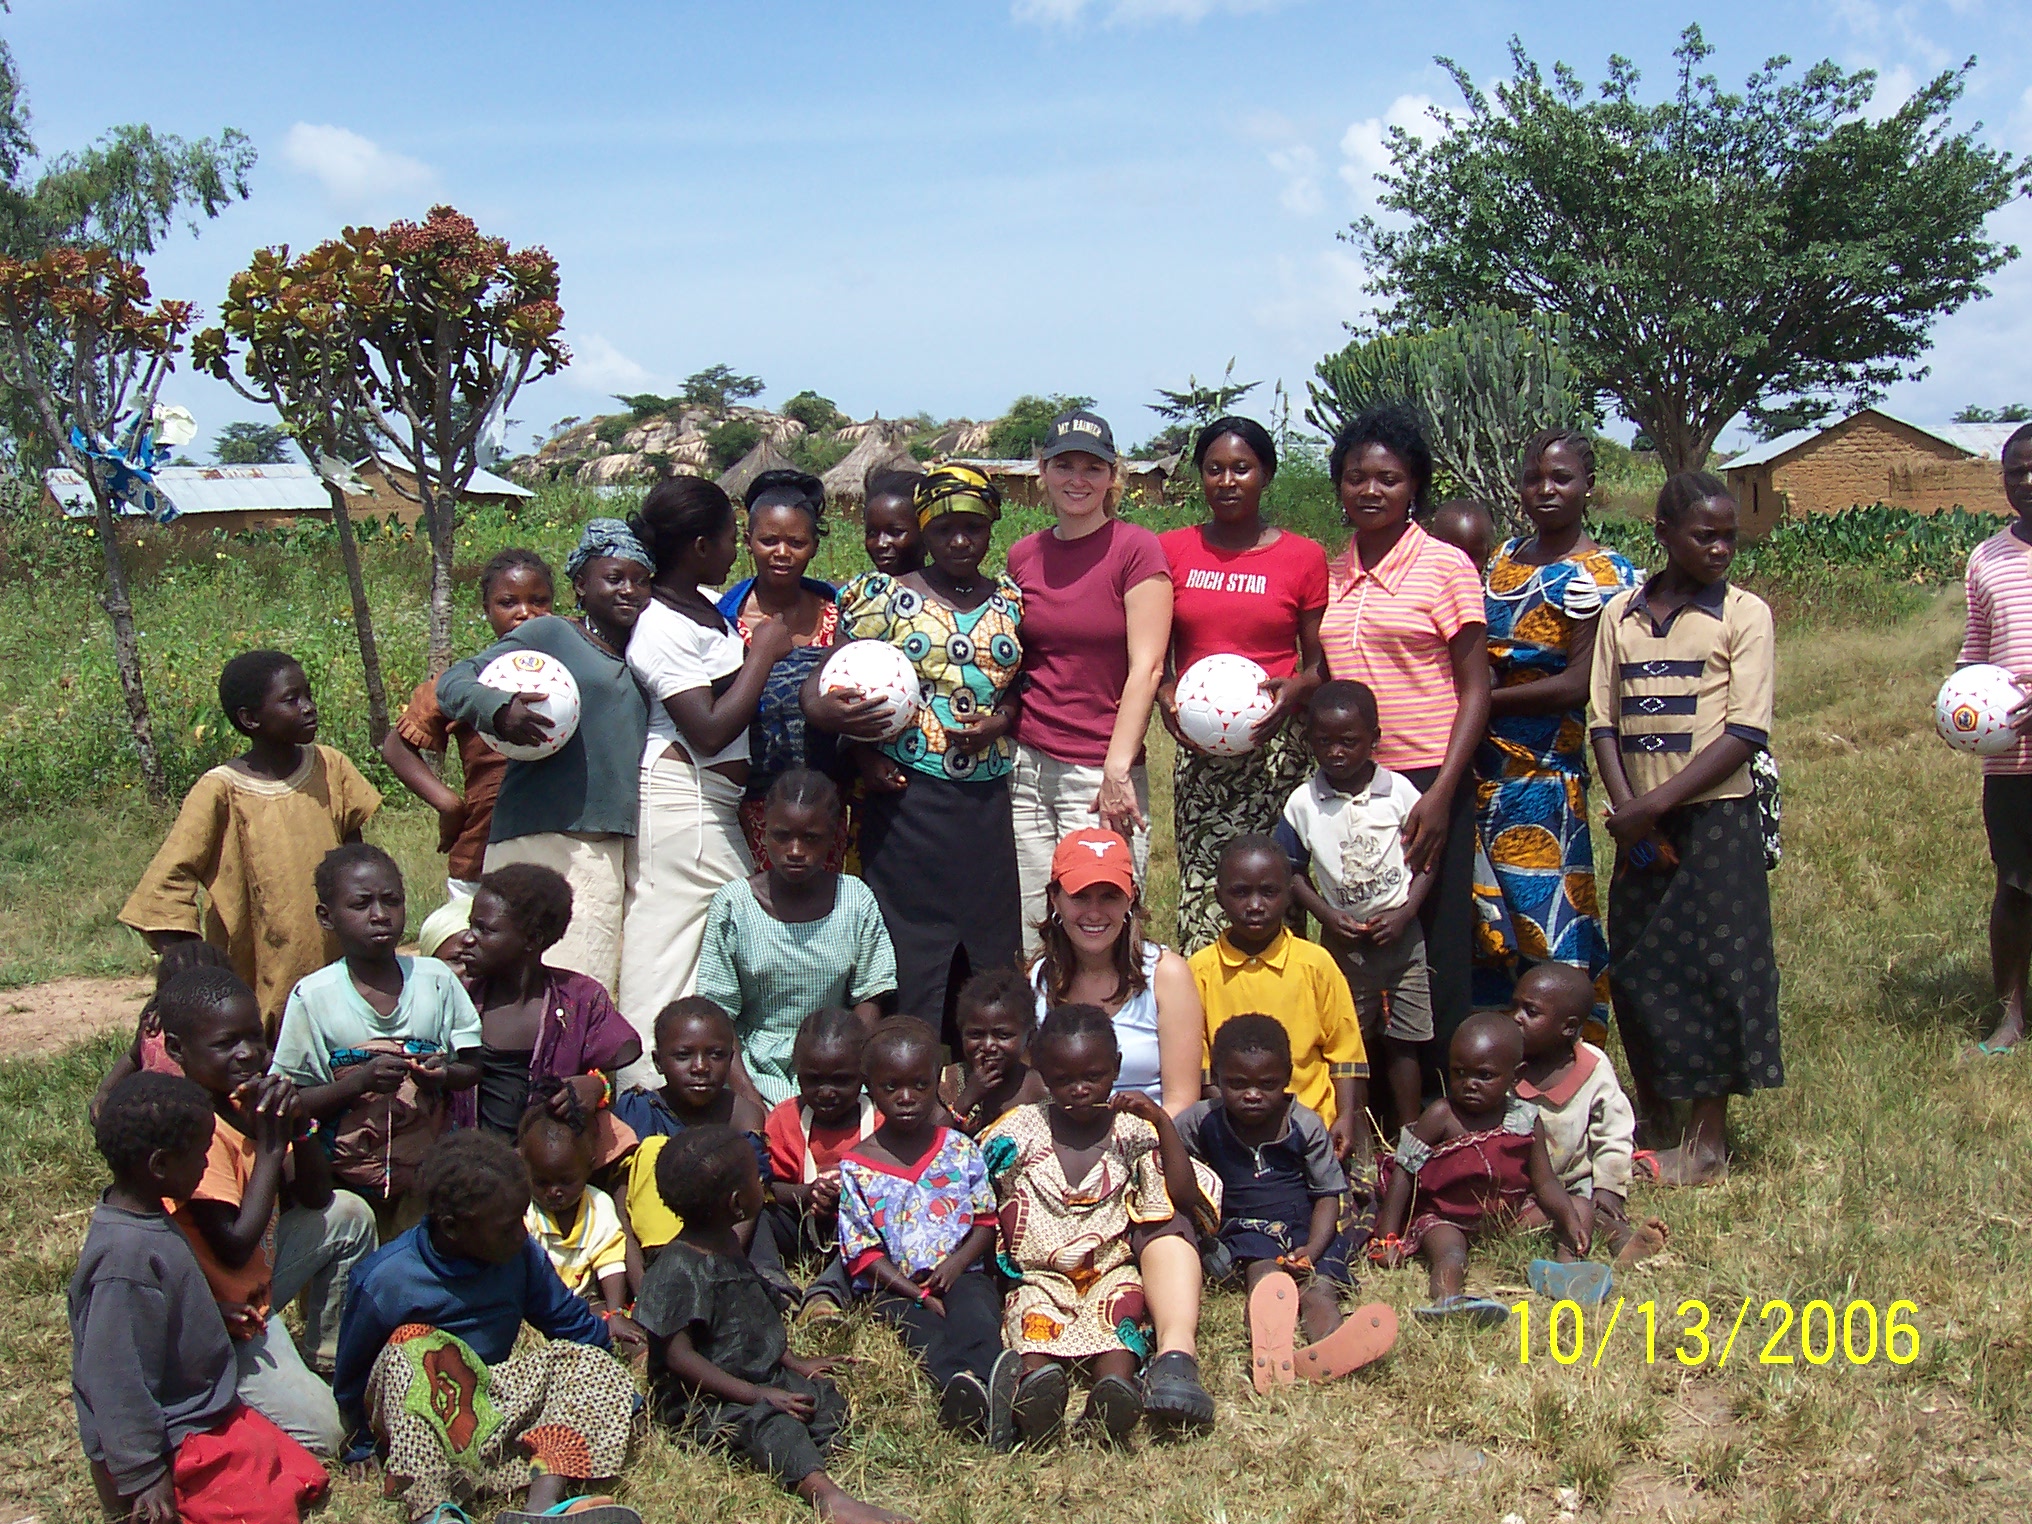 Handing out soccer balls to children in the village with the Munafos